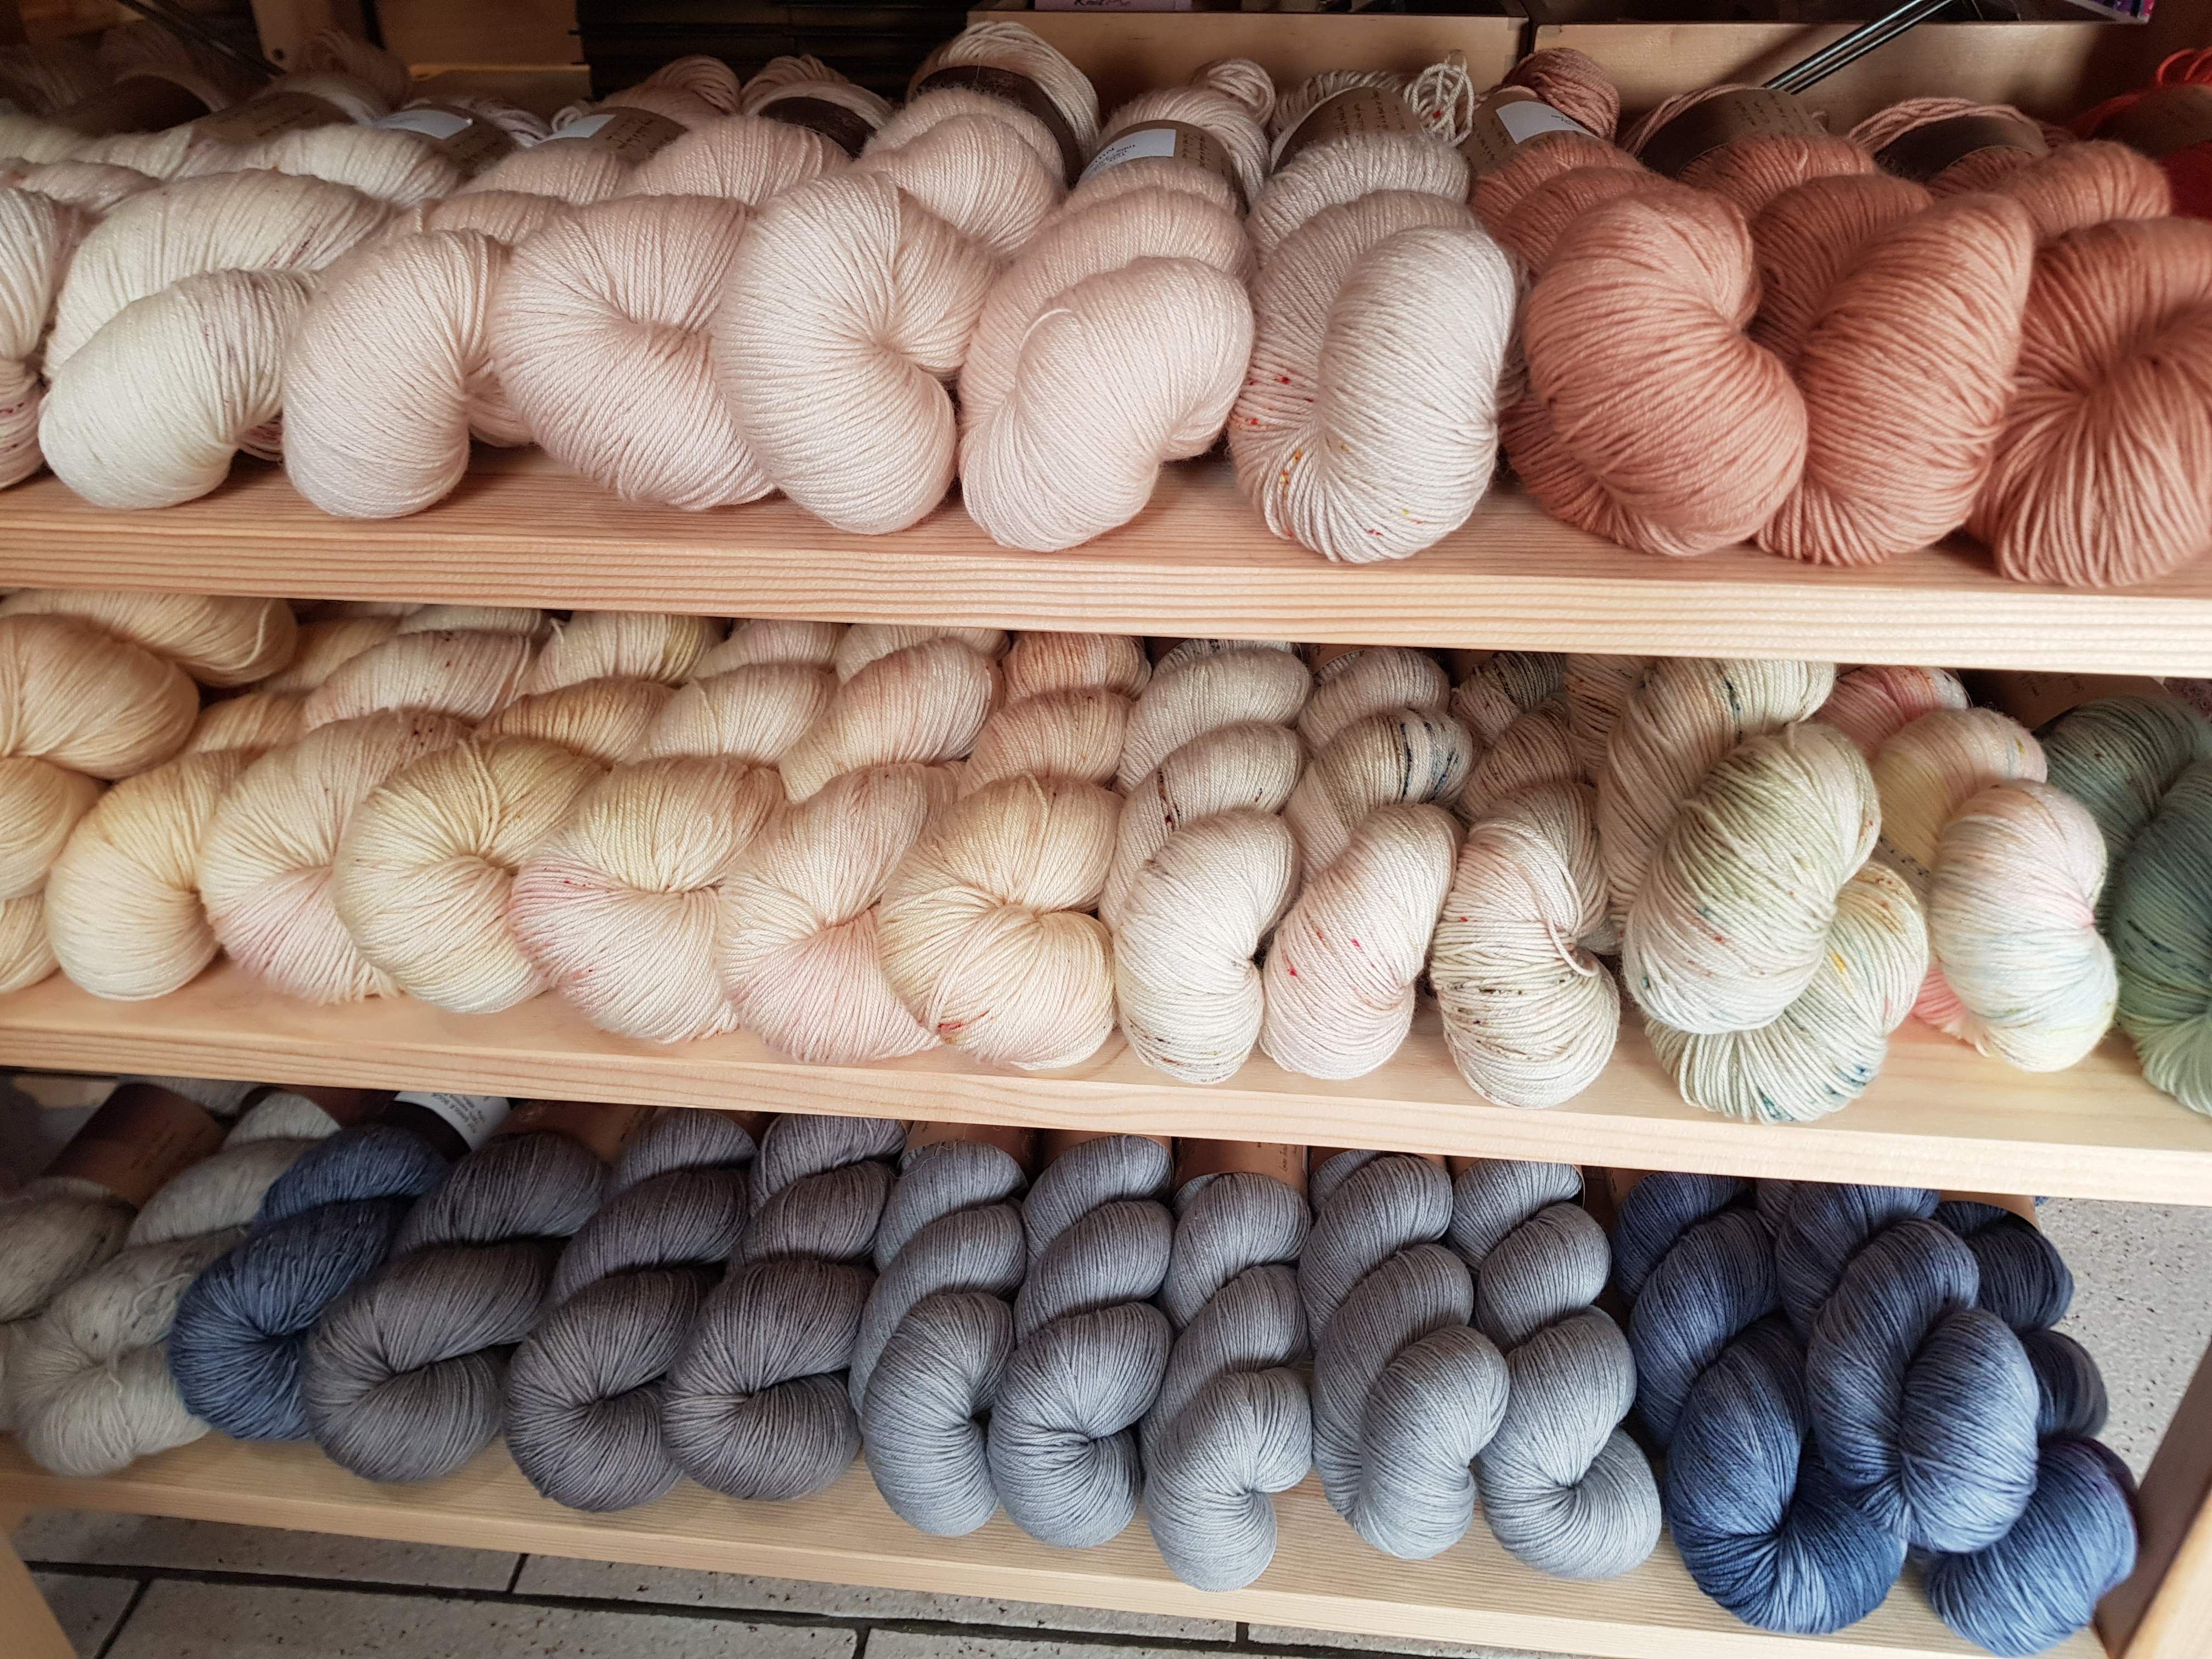 June knitting and crochet retreat - shopping for fabric and yarn